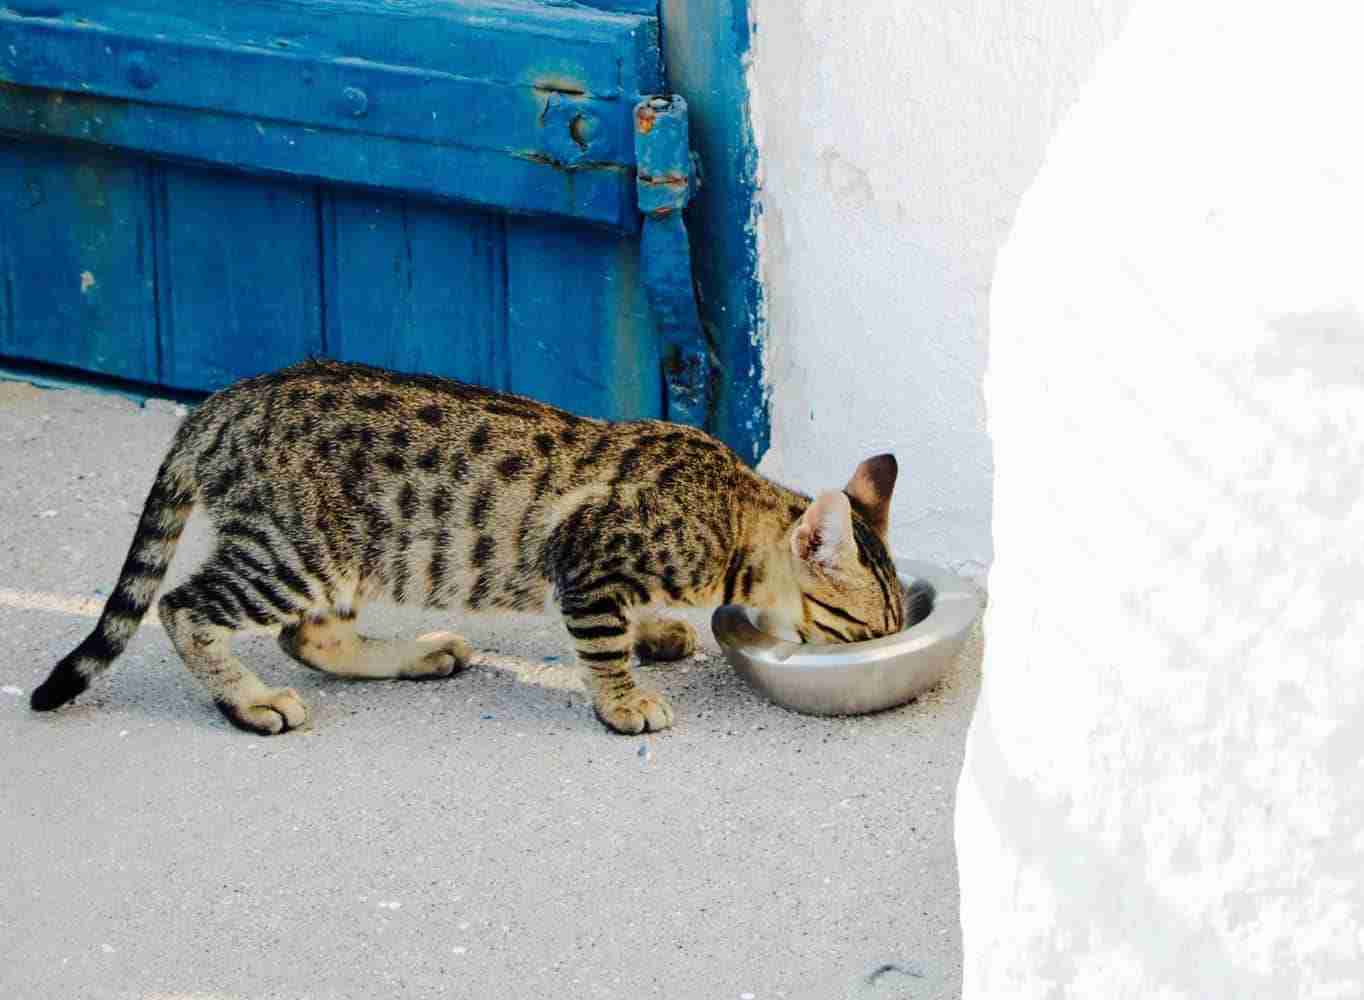 a spotted and striped brown and black tabby cat eating from a bowl outdoors in Greece